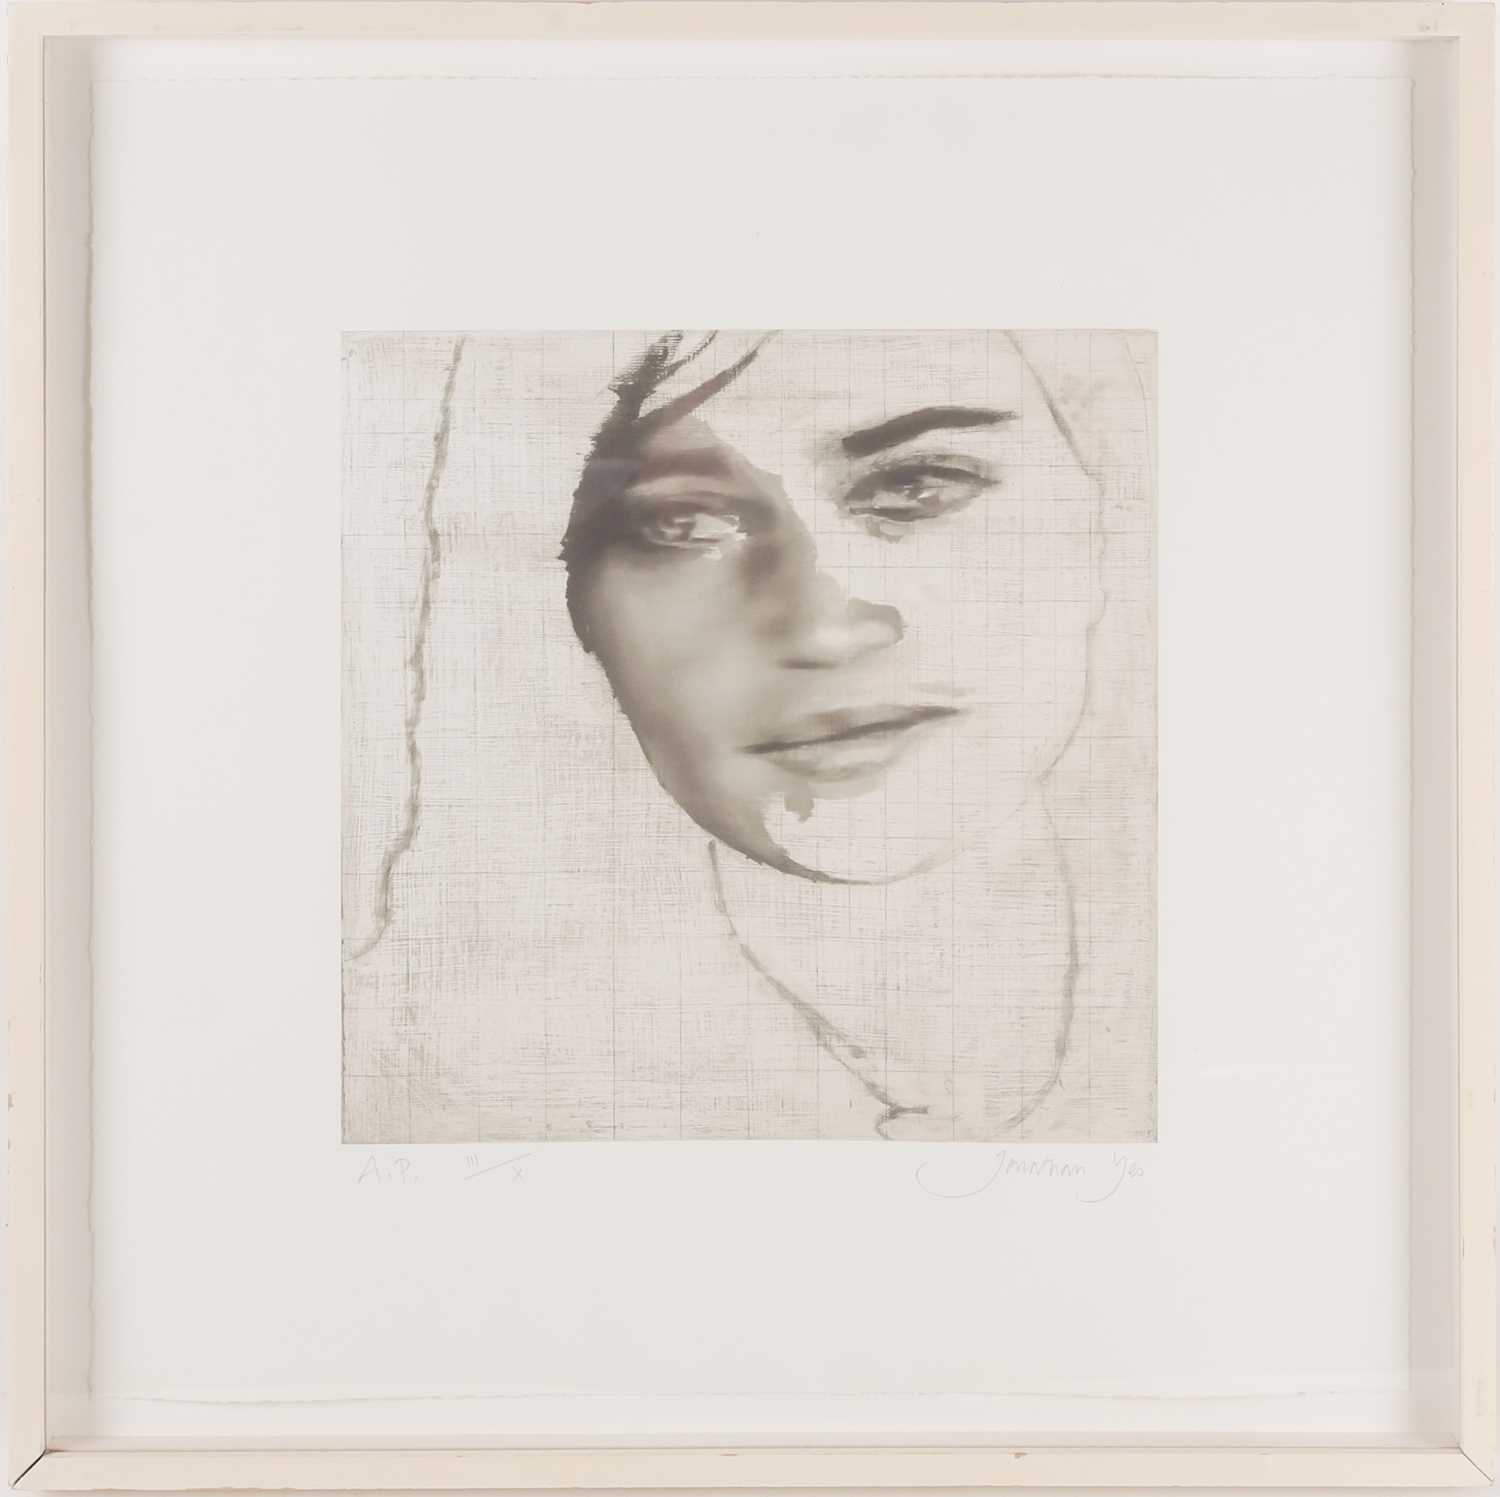 Jonathan Yeo (b.1970), 'Shebah', a portrait of the artist's wife, Shebah Ronay, limited edition